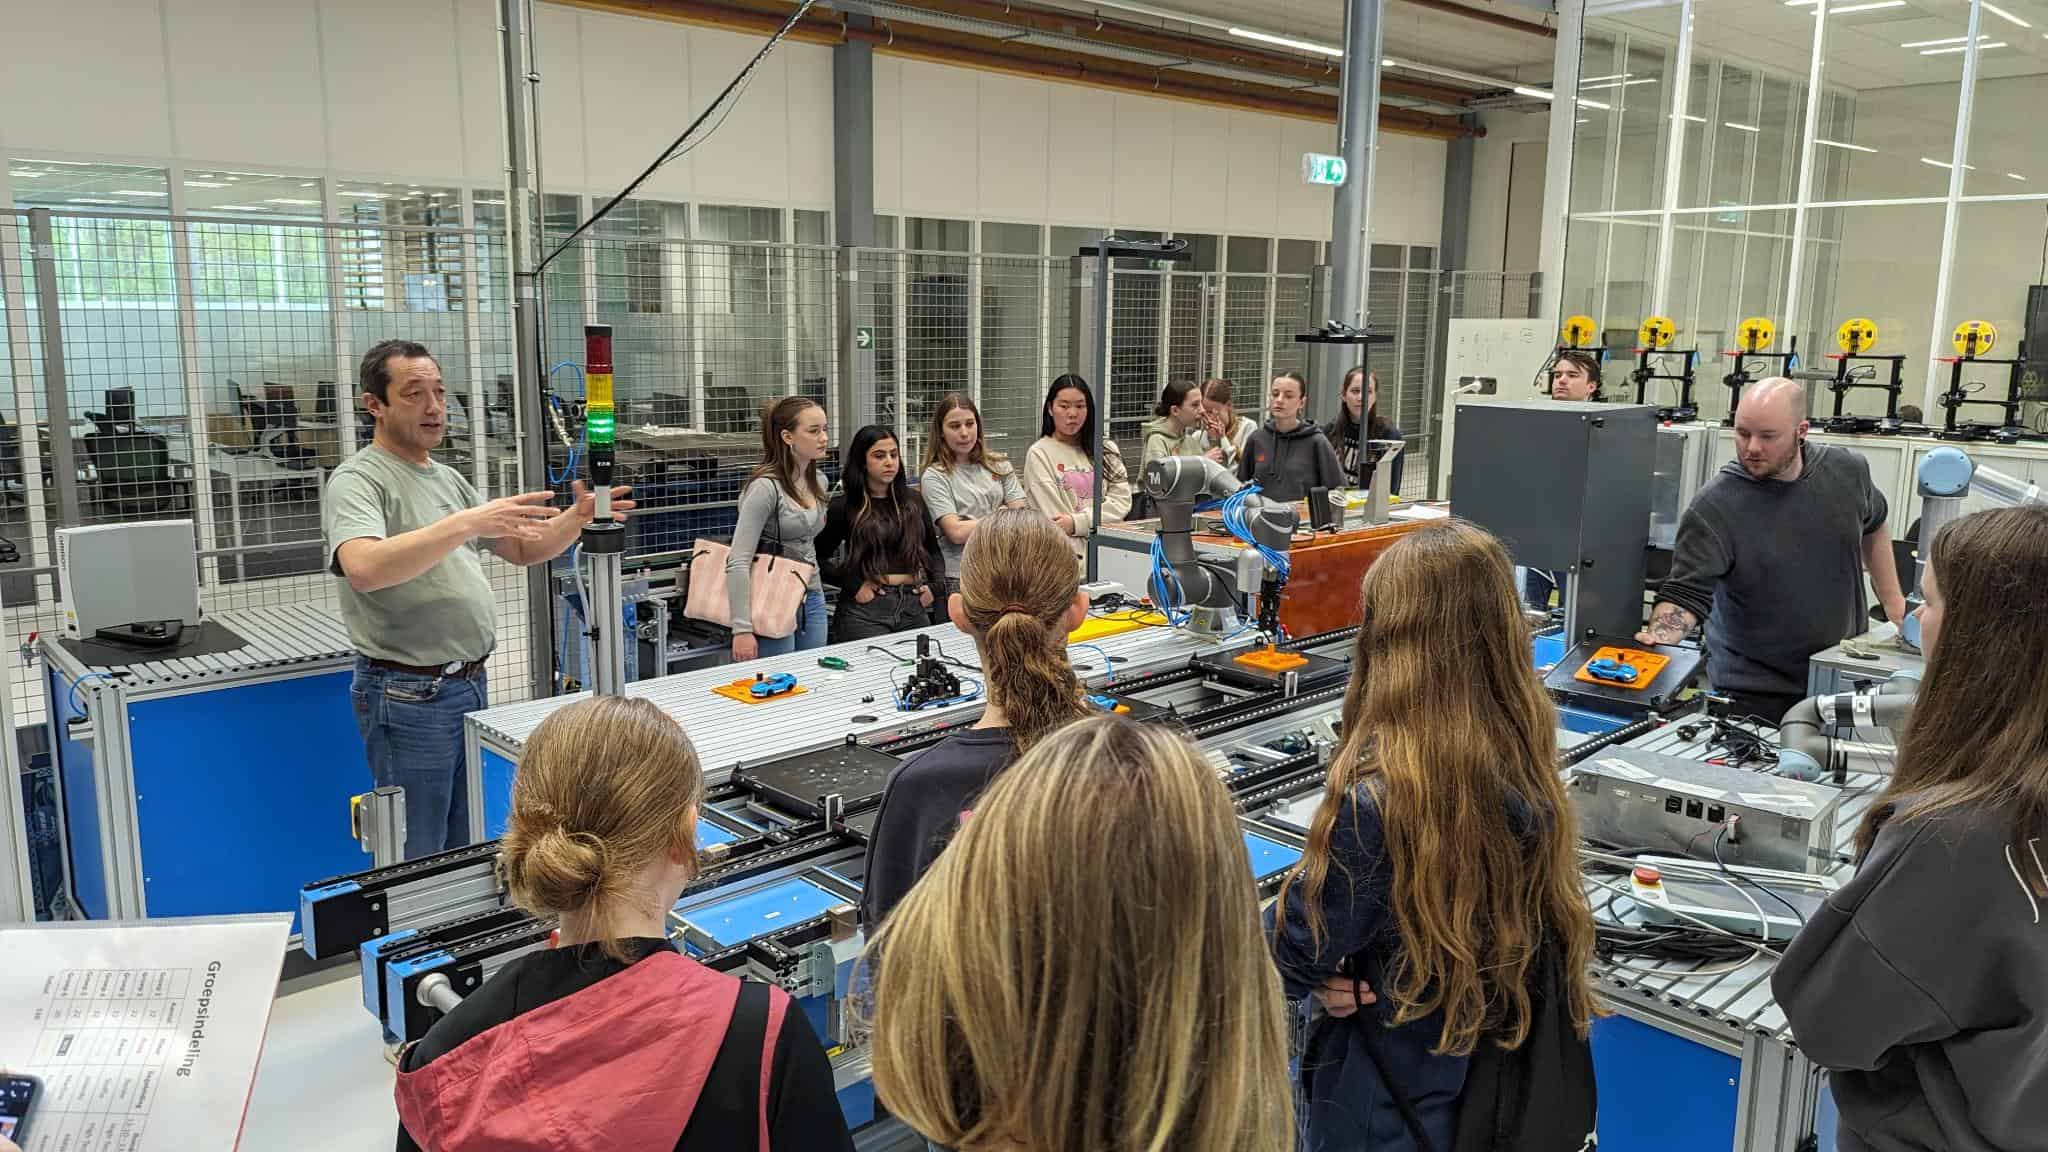 Girls' Day: 130 girls at Brainport Industries Campus looking for a future in engineering